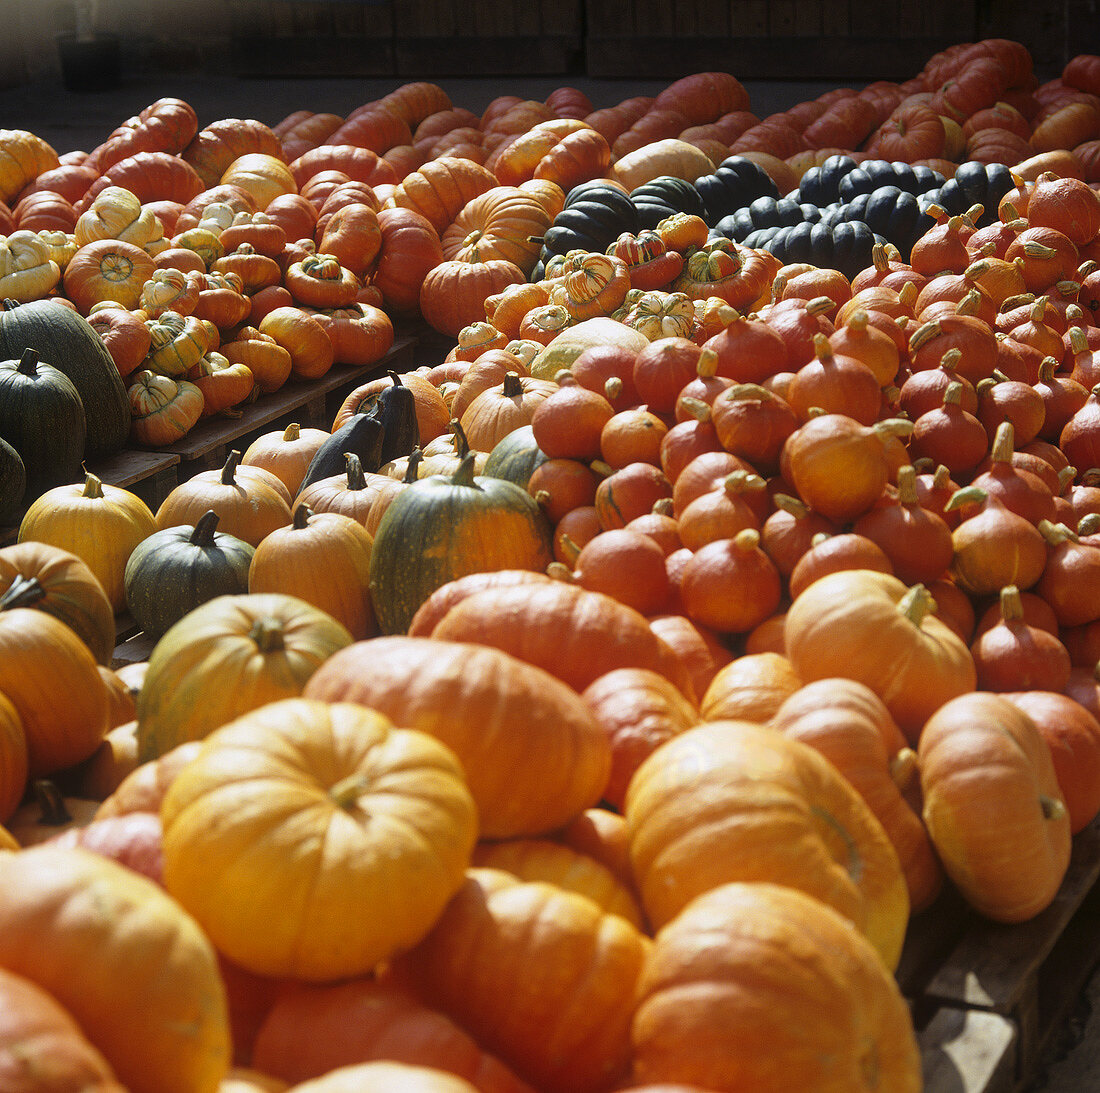 Many different squashes and pumpkins